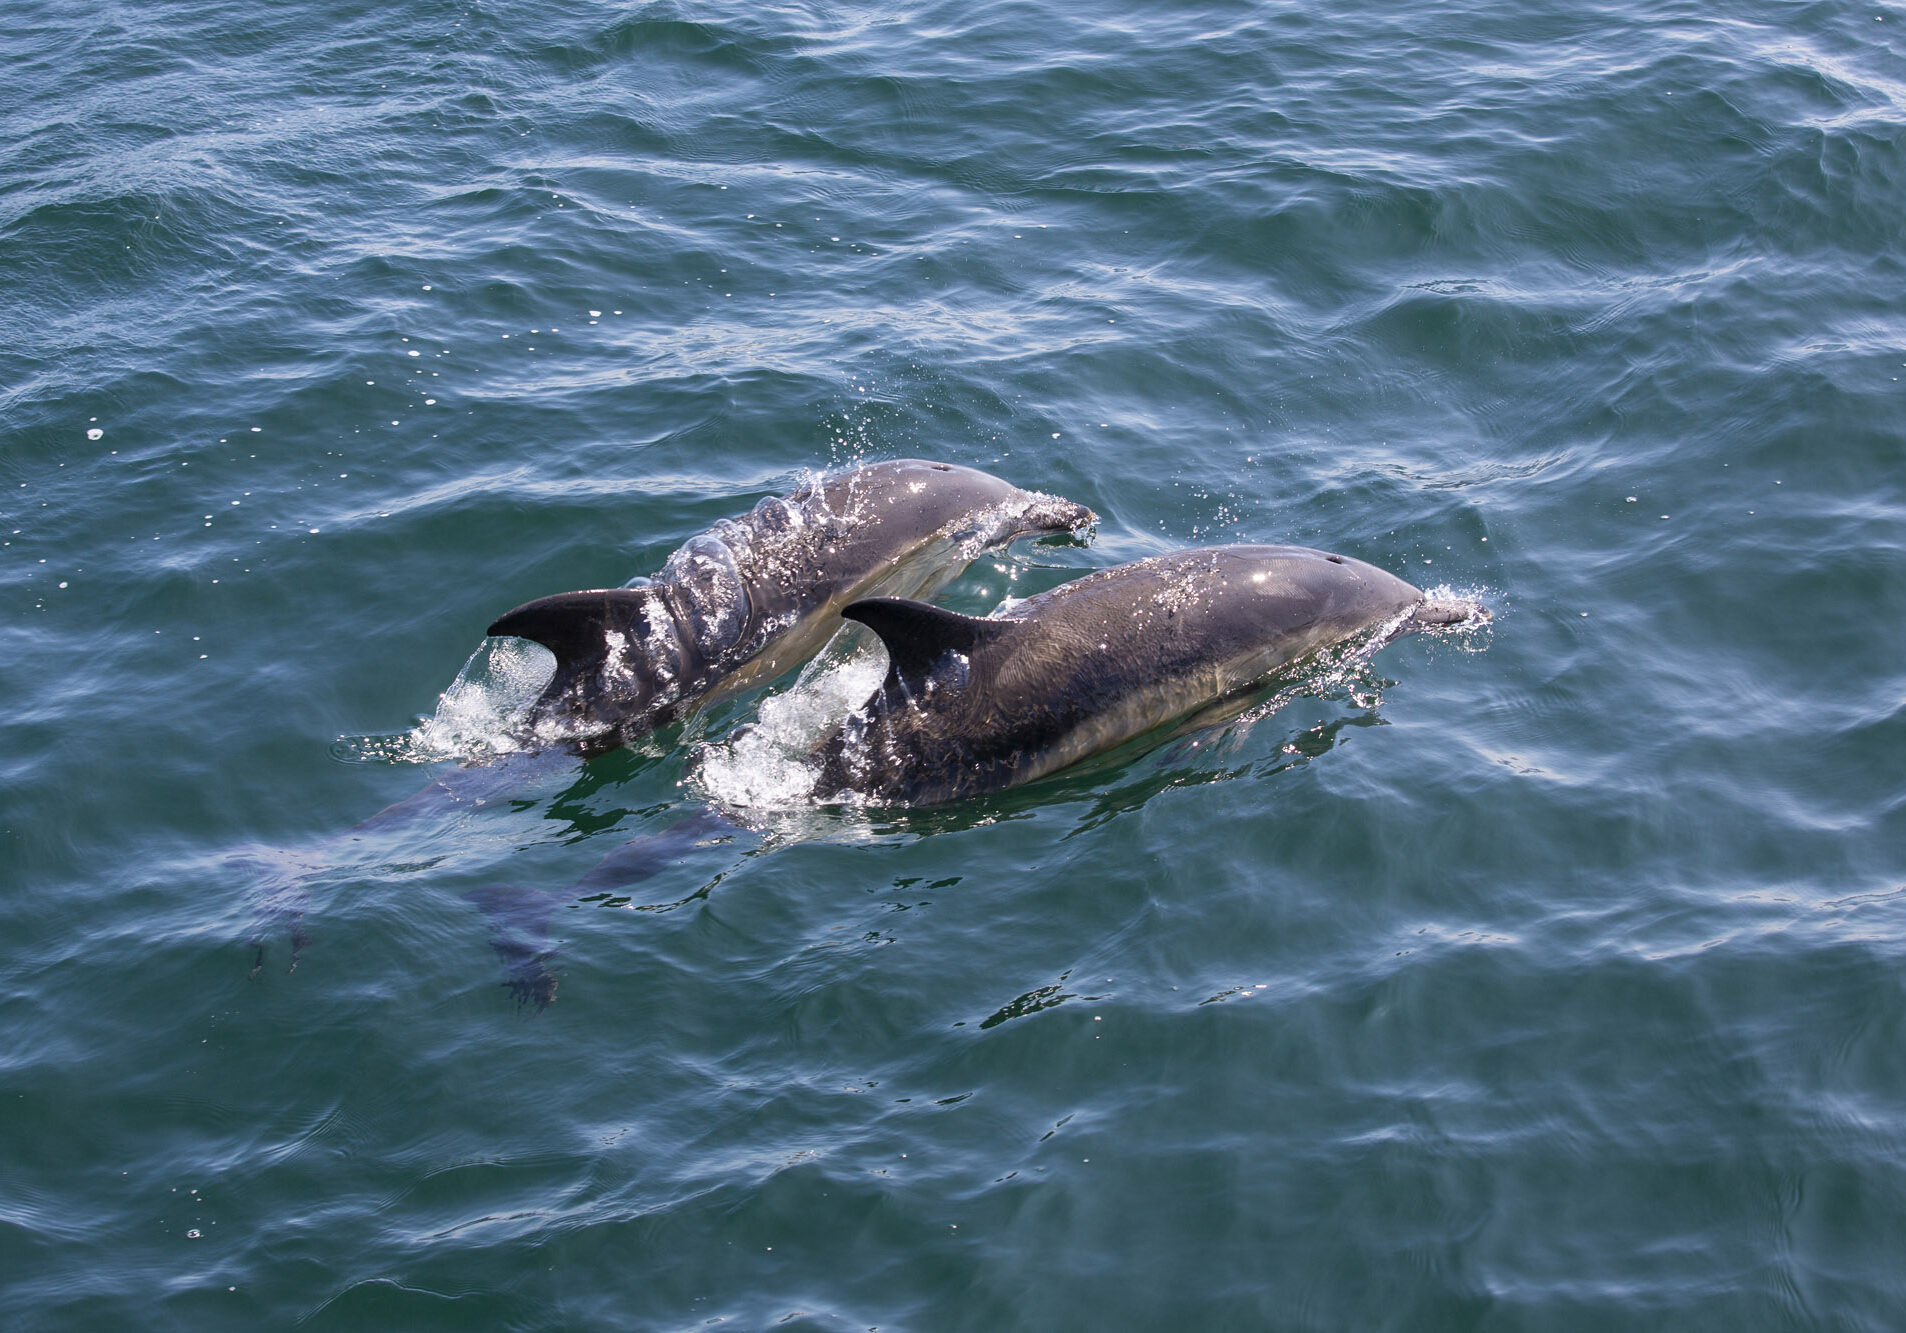 Common-Dolphins-spotted-in-the-Treshnish-Isles-newly-acquired-by-the-National-Trust-for-Scotland-2ykpnzh42